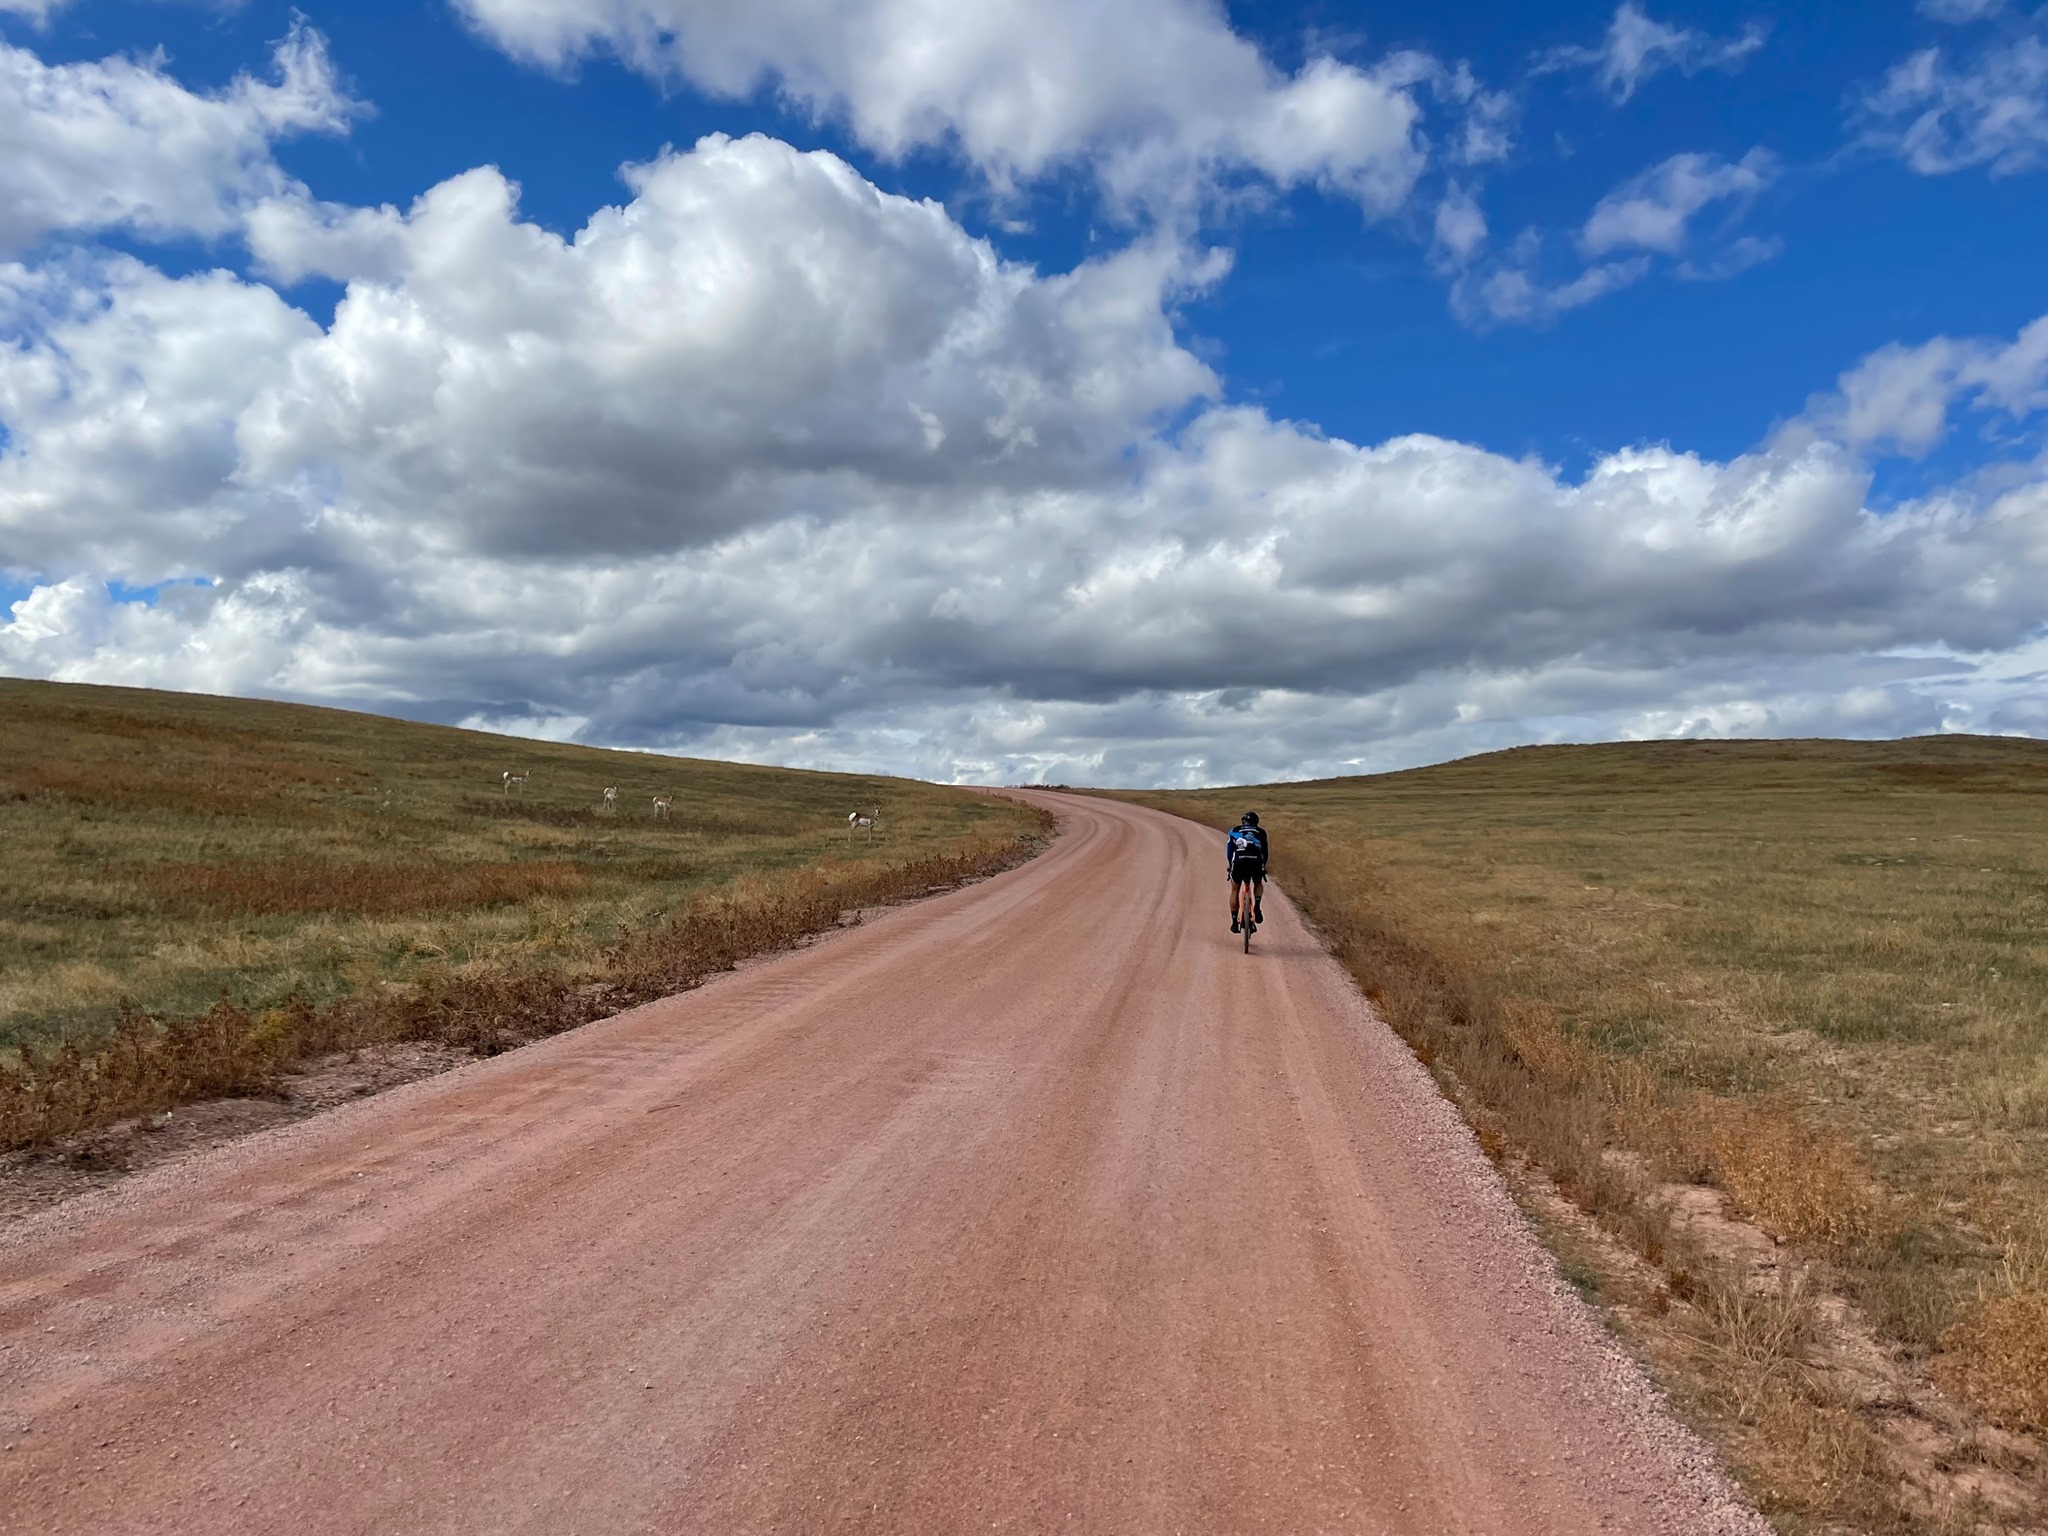 Cyclist on dirt road under blue sky with white puffy clouds